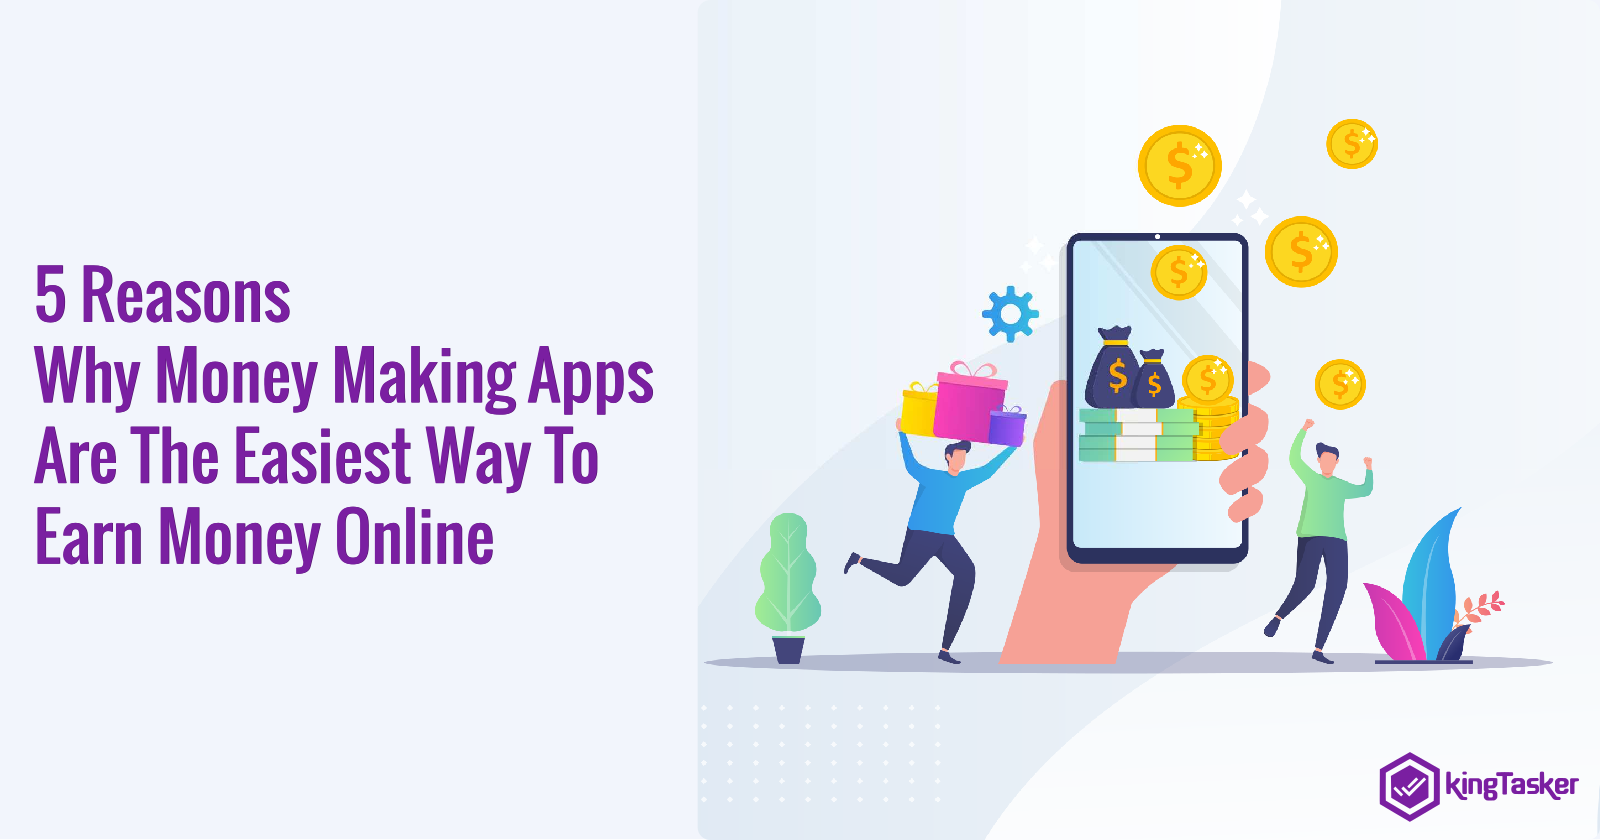 5 Reasons Why Money Making Apps Are The Easiest Way To Earn Money Online